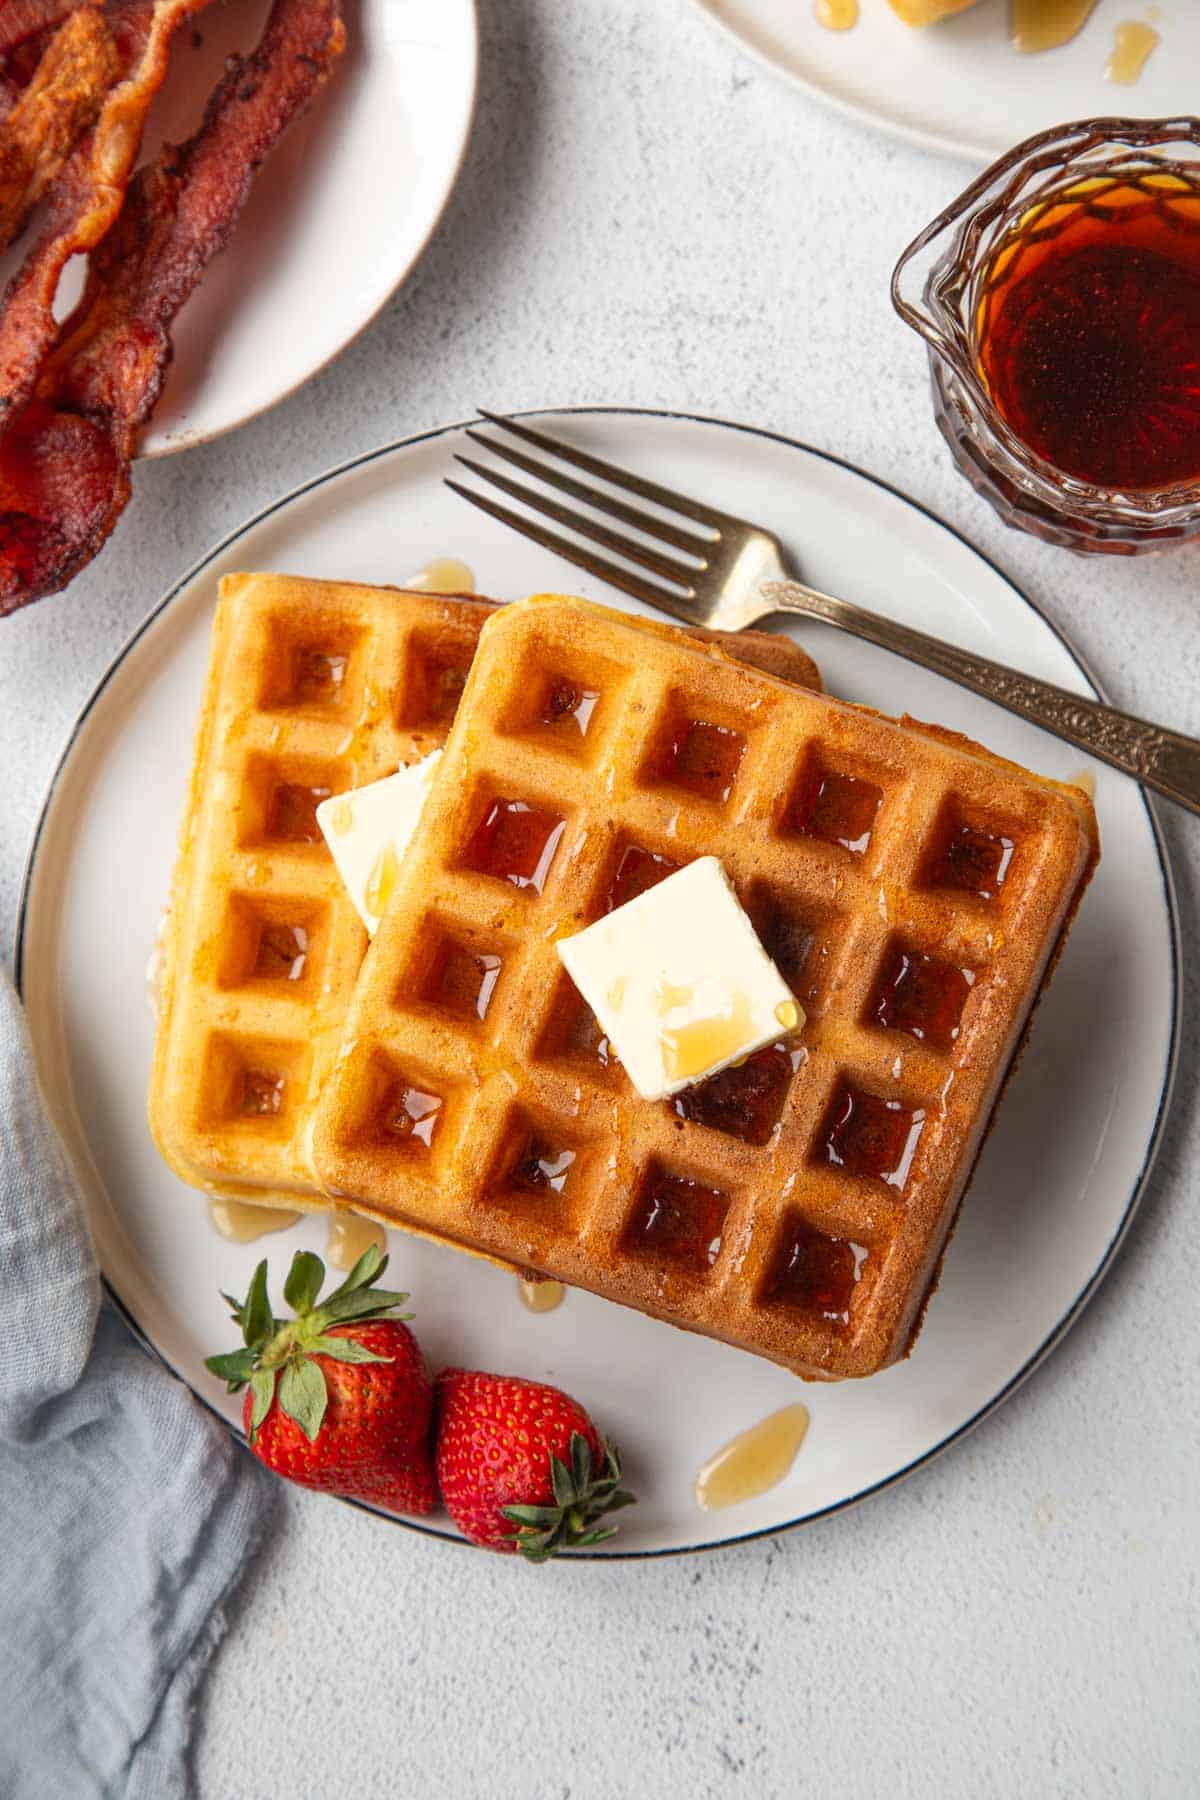 two yeast waffles on a plate with strawberries, a pat of butter, and maple syrup.